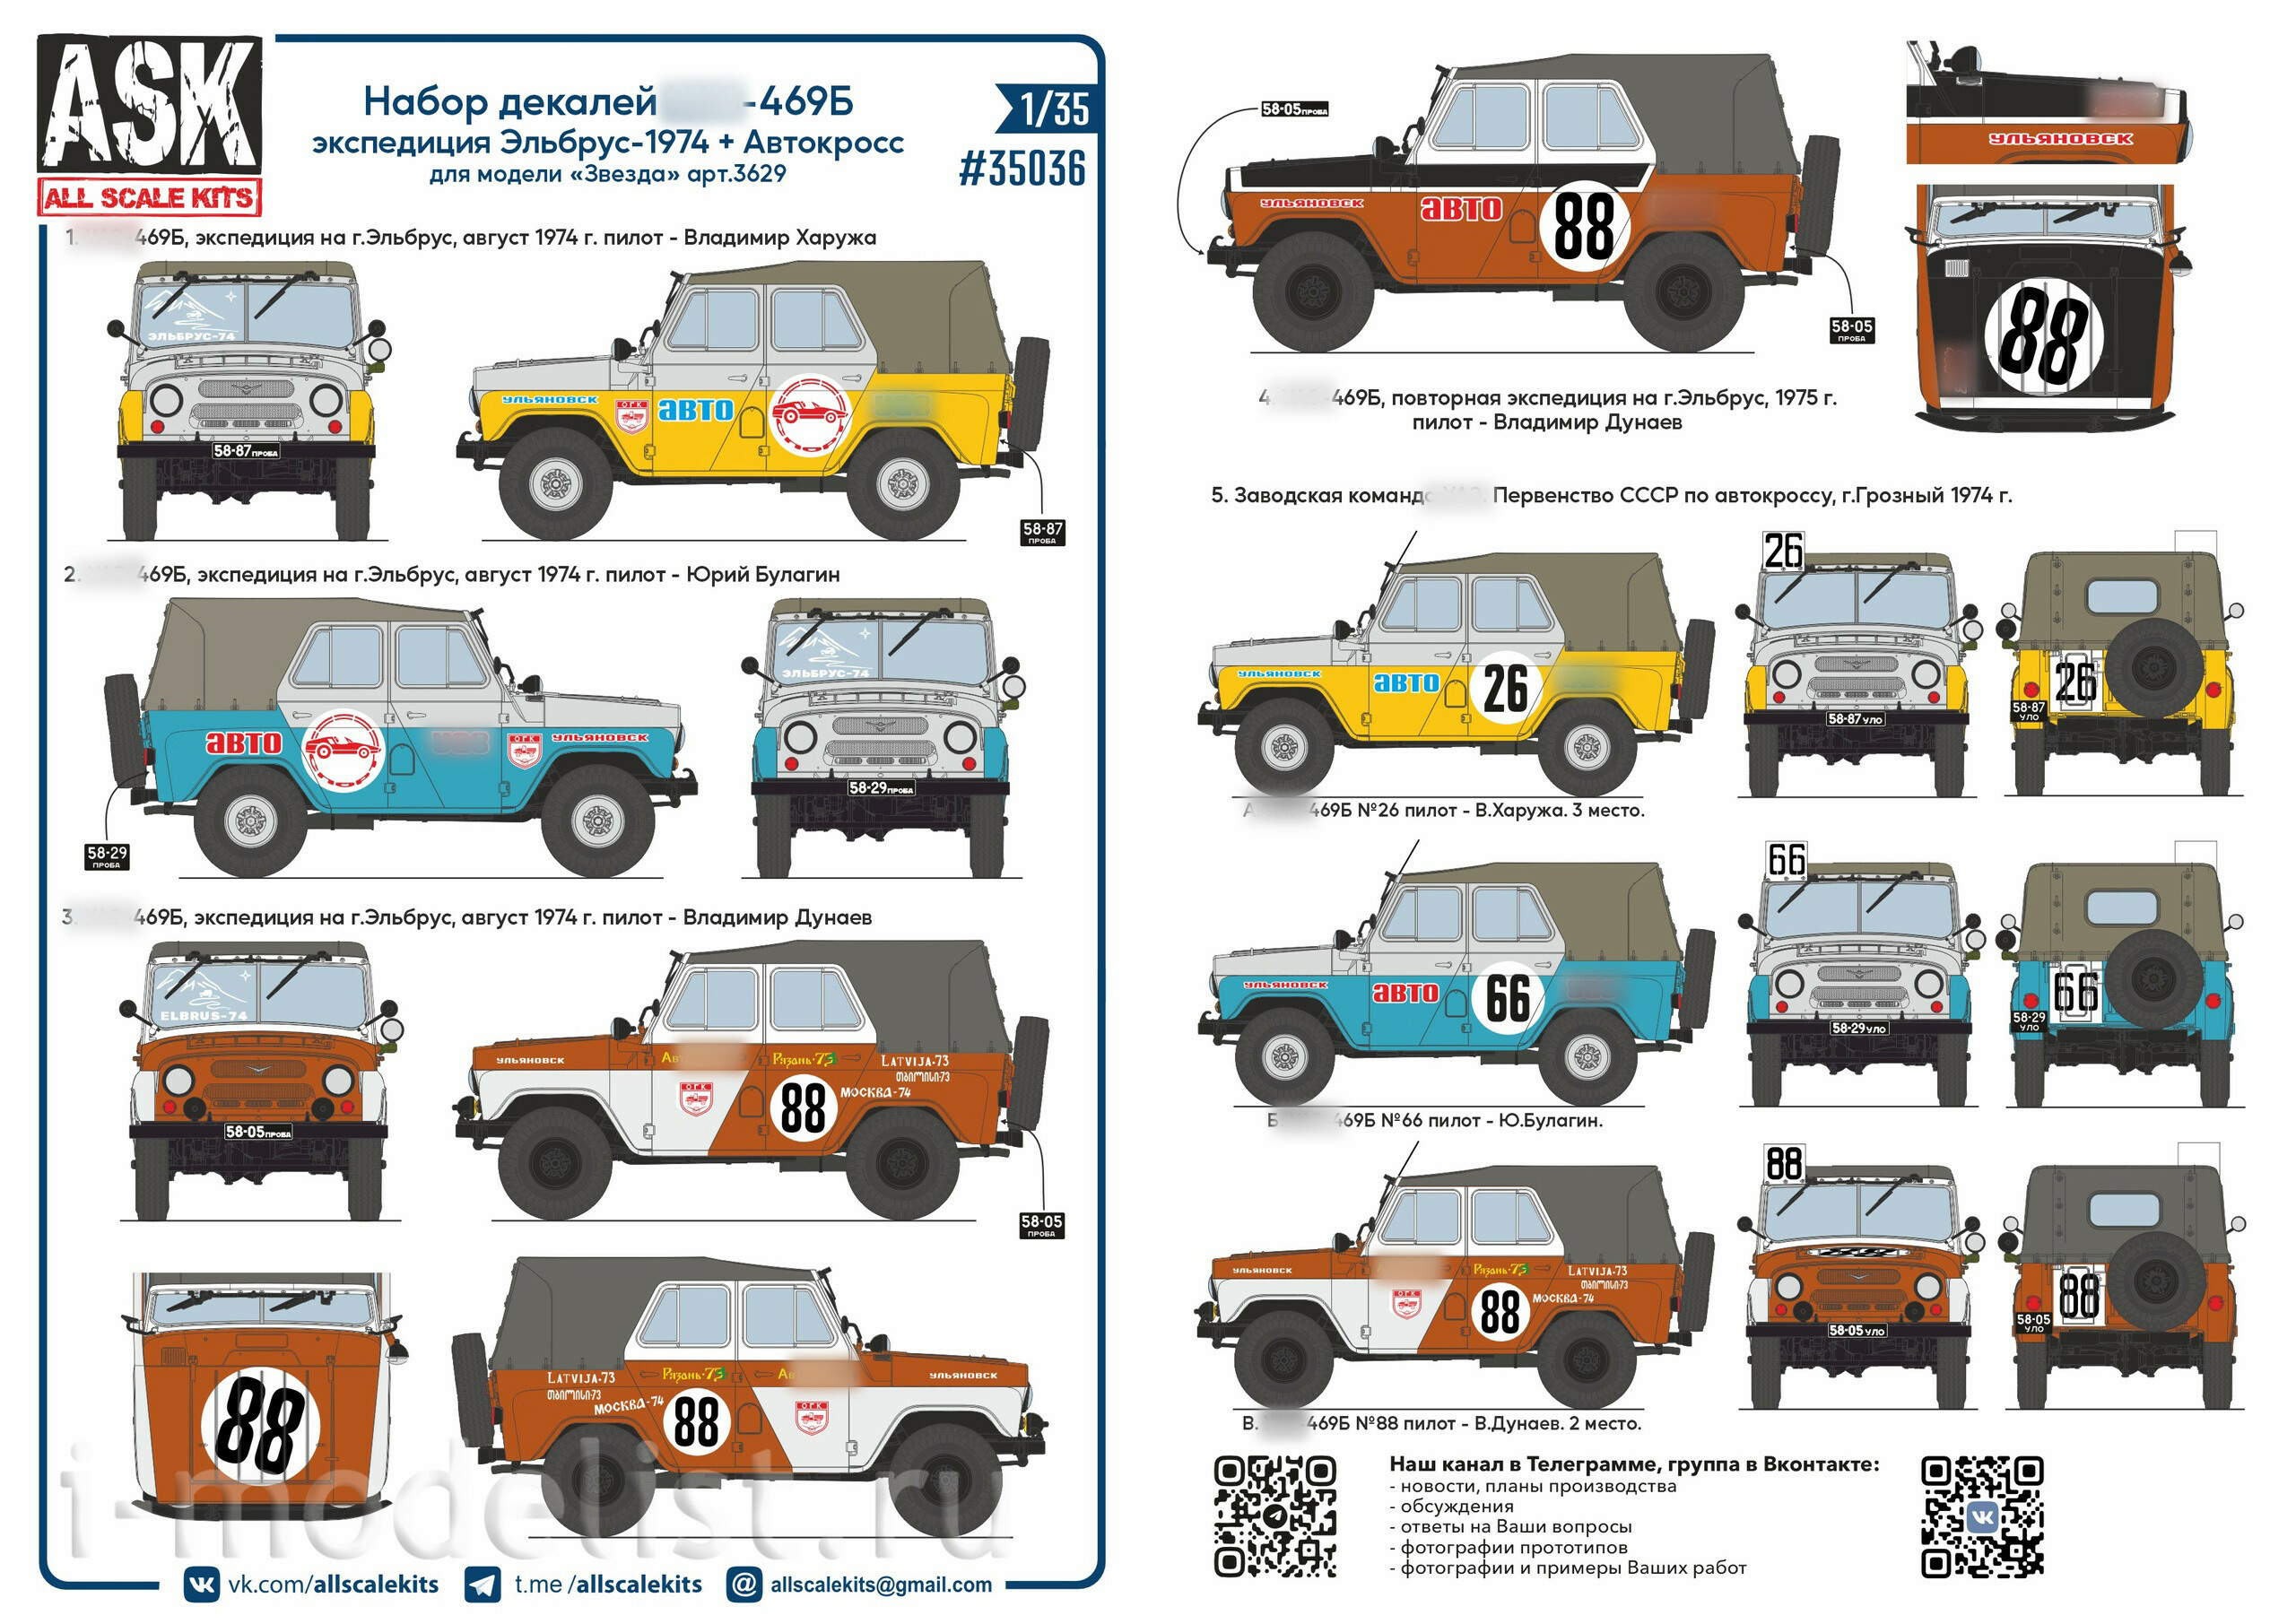 ASK35036 All Scale Kits (ASK) 1/35 Set of decals expedition to Elbrus 1974 + USSR Autocross for the Zvezda model, art. 3629